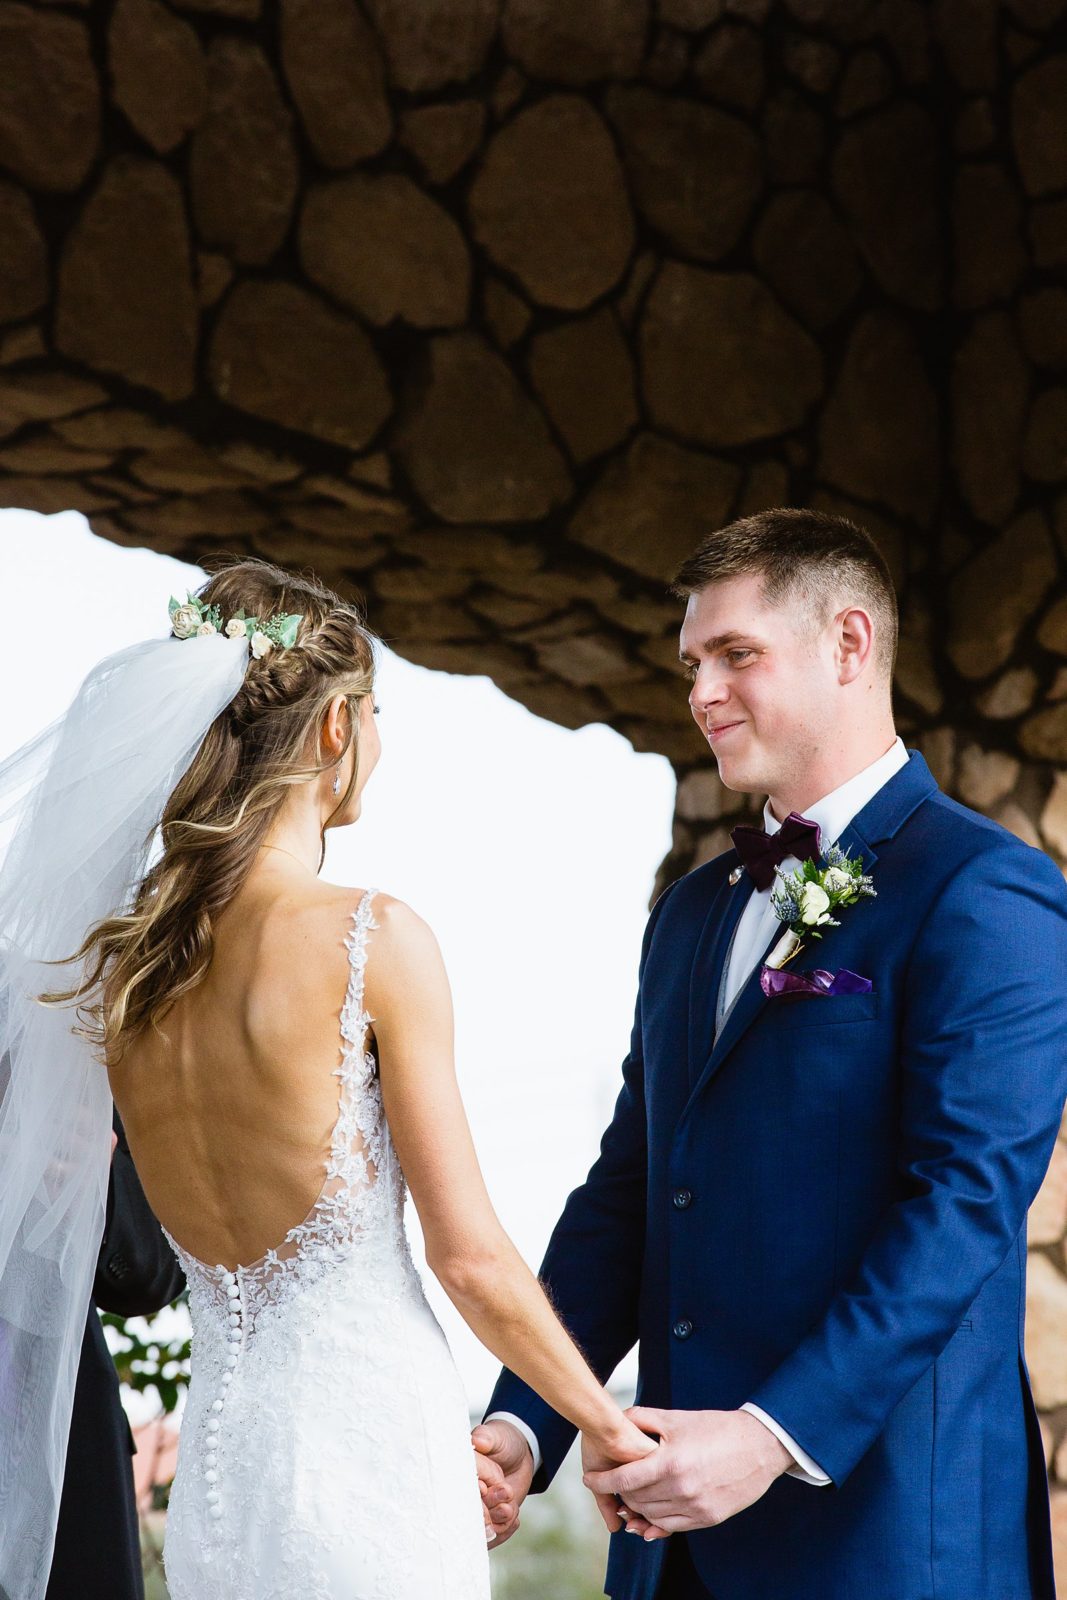 Groom looking at his bride during their wedding ceremony at Superstition Manor by Mesa wedding photographer PMA Photography.